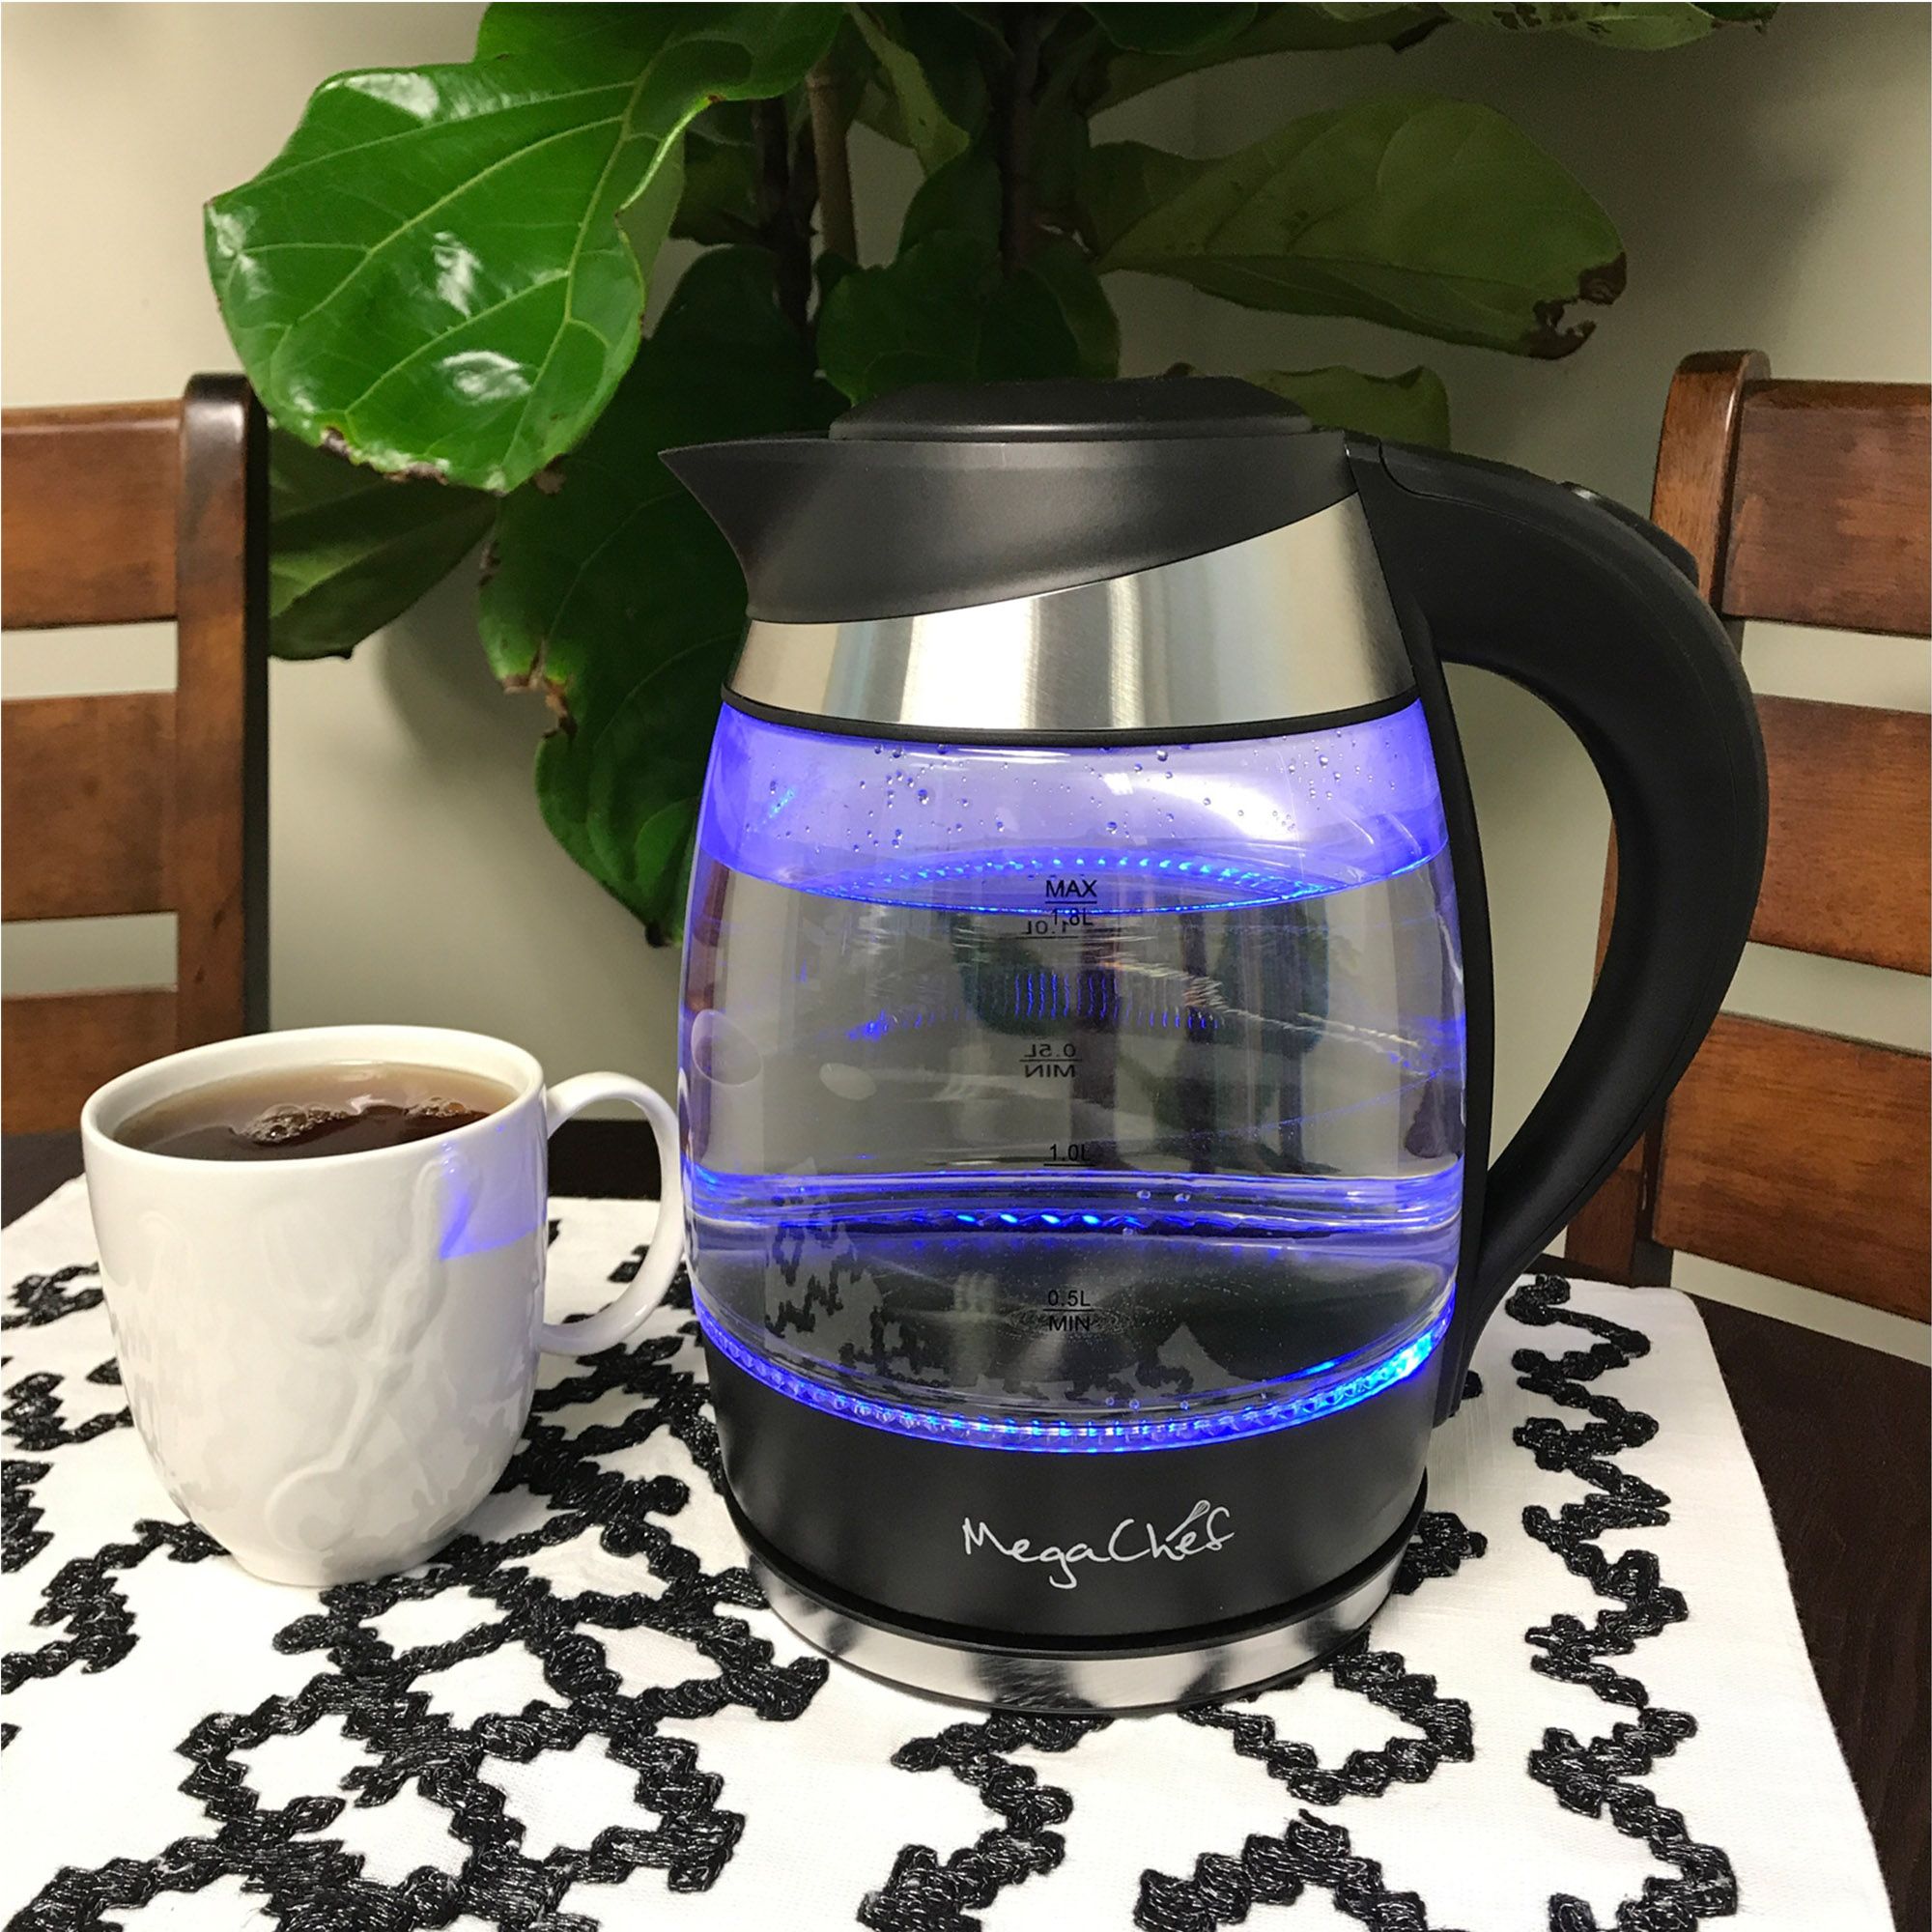 Reviews for MegaChef 1.8 l Glass and Stainless Steel Electric Tea Kettle